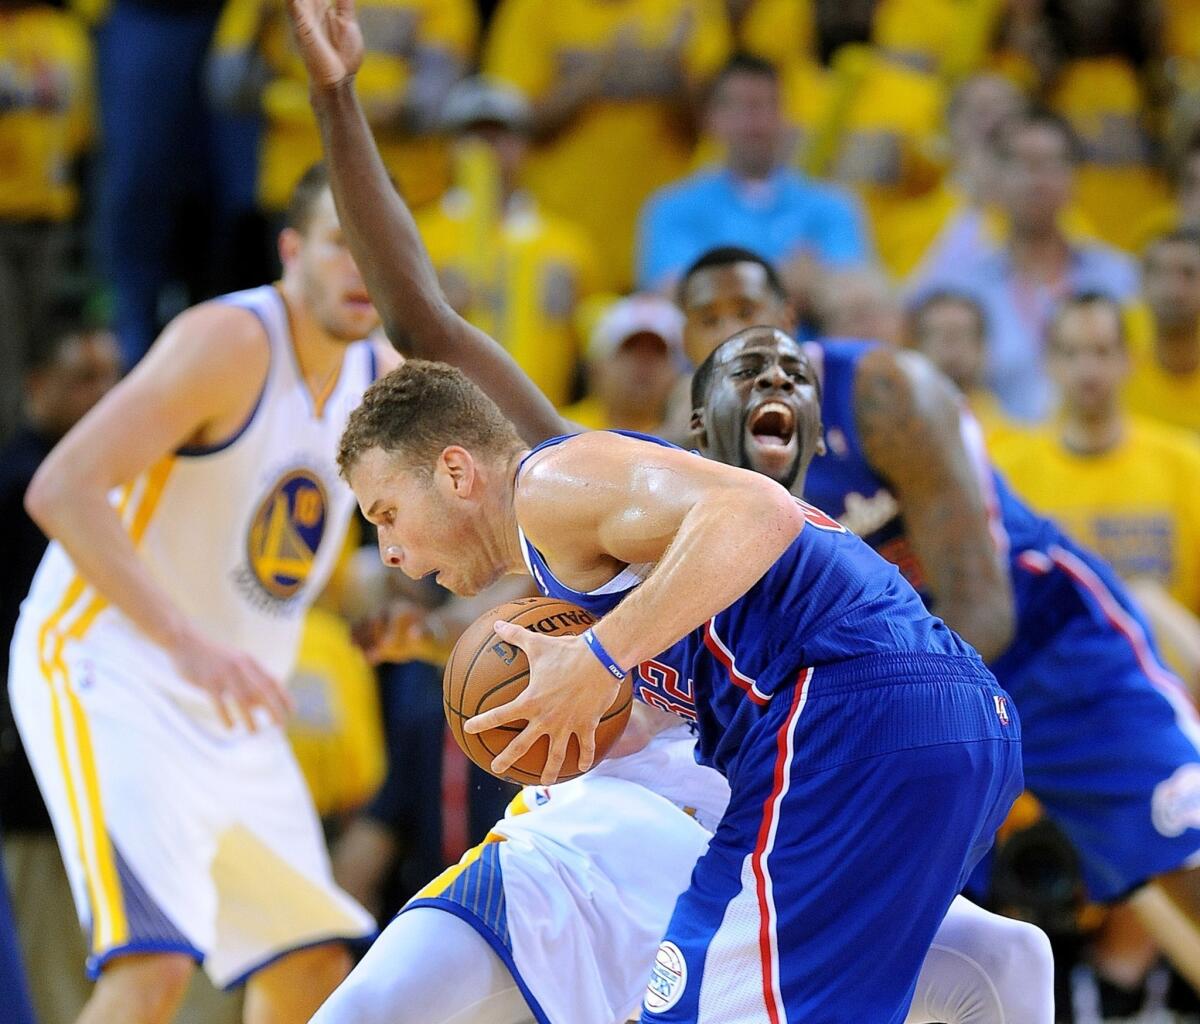 Clippers power forward Blake Griffin's drive is cut off by Warriors power forward Draymond Green in Game 3 of the first-round Western Conference playoffs series, but Green is called for a blocking foul.